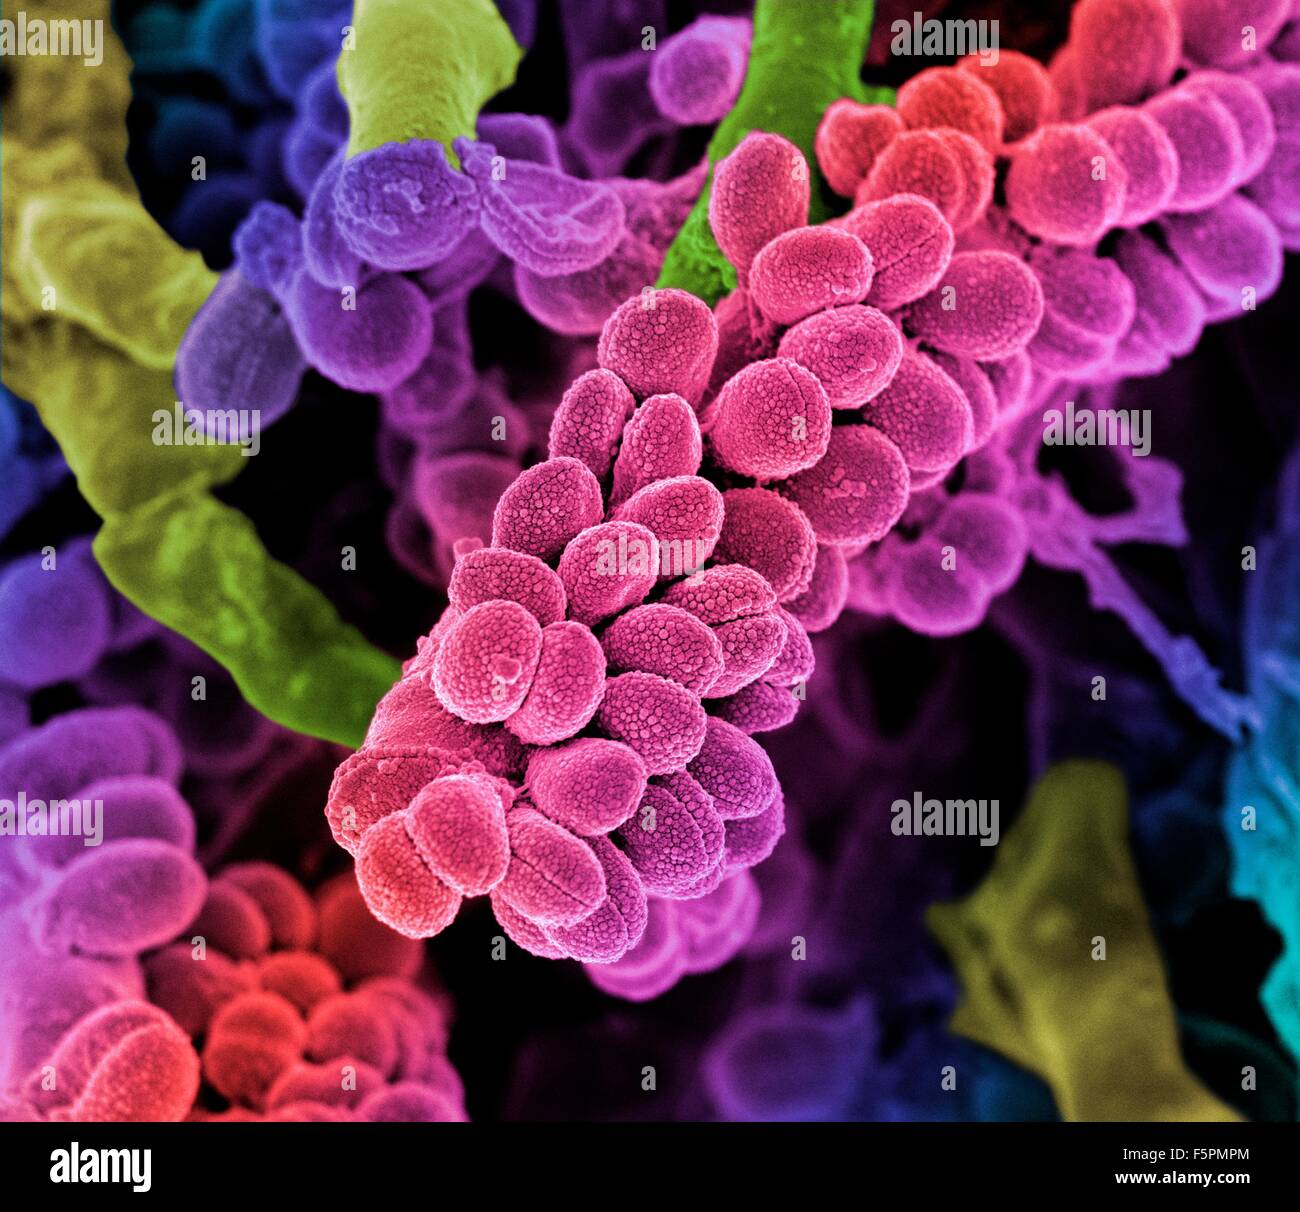 Streptococcus bacteria. Coloured scanning electron micrograph (SEM) of chains of Streptococcus bacteria with Streptomyces Stock Photo